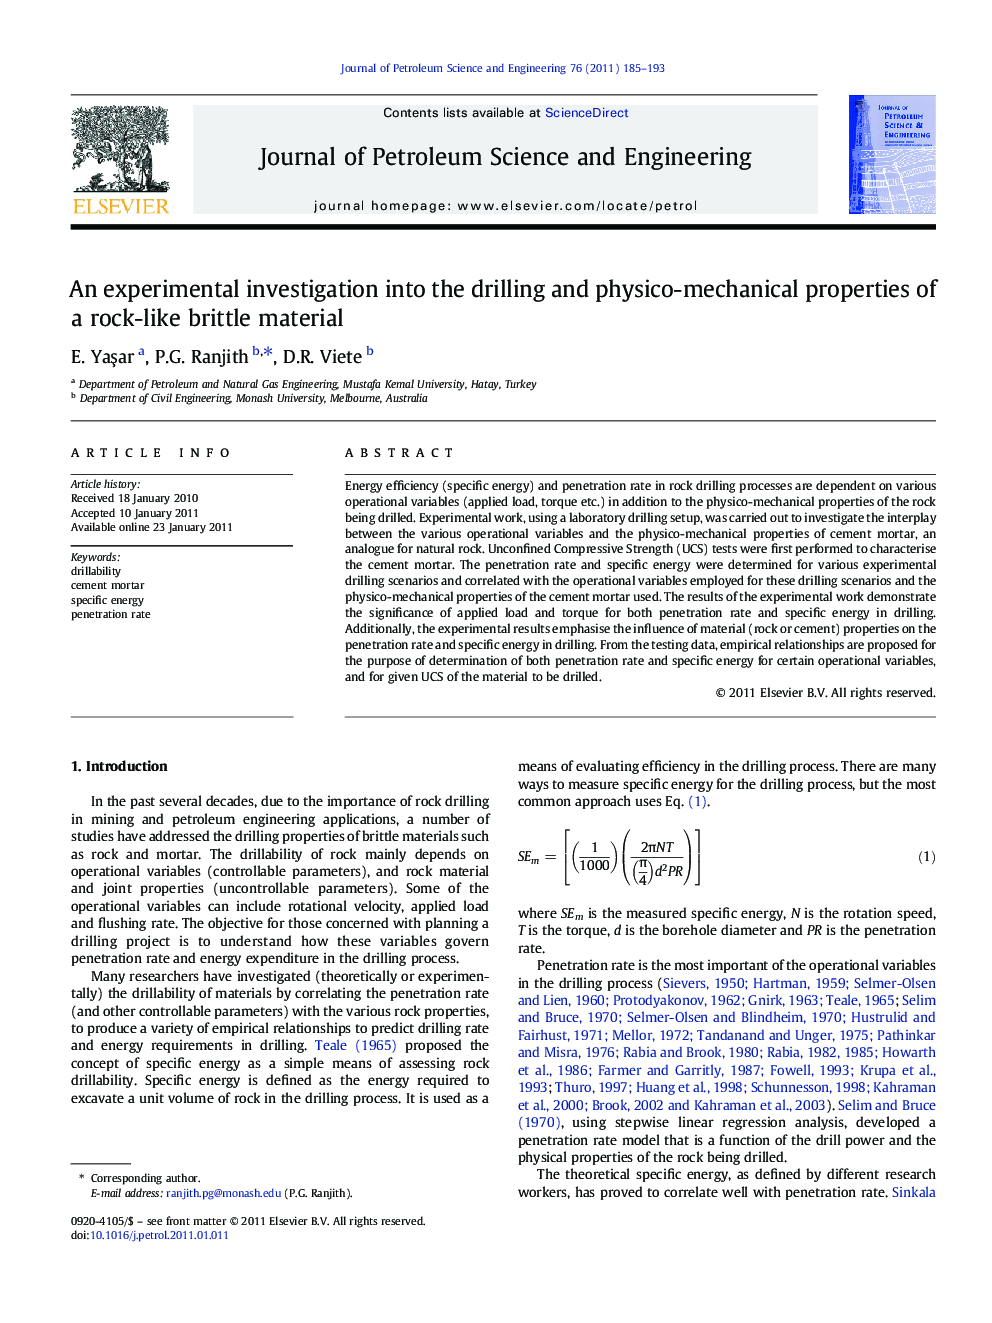 An experimental investigation into the drilling and physico-mechanical properties of a rock-like brittle material